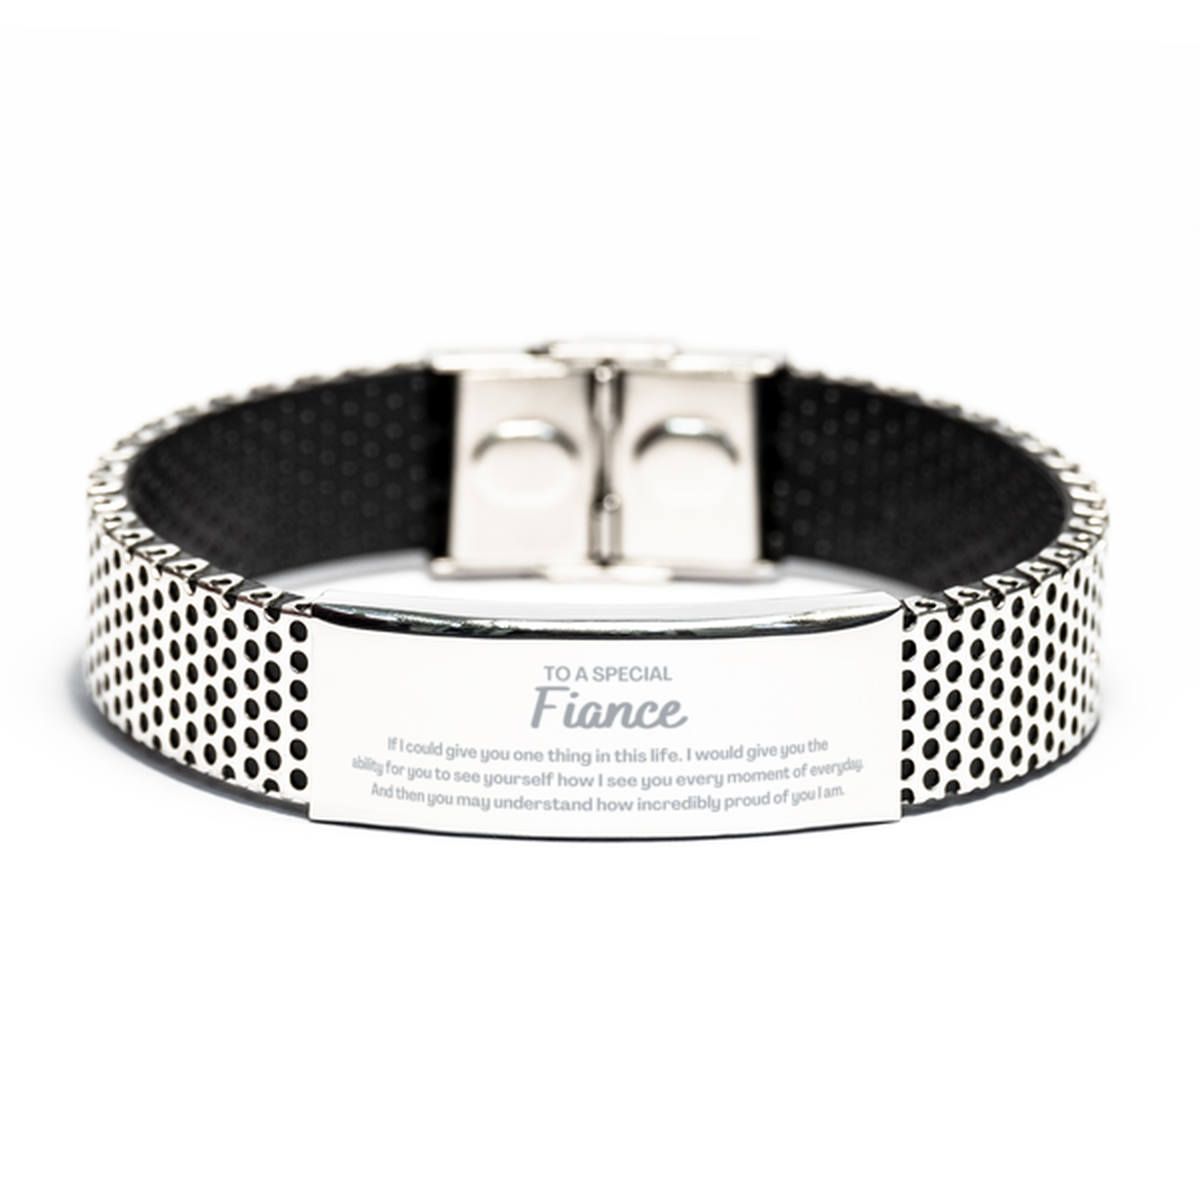 To My Fiance Stainless Steel Bracelet, Gifts For Fiance Engraved, Inspirational Gifts for Christmas Birthday, Epic Gifts for Fiance To A Special Fiance how incredibly proud of you I am